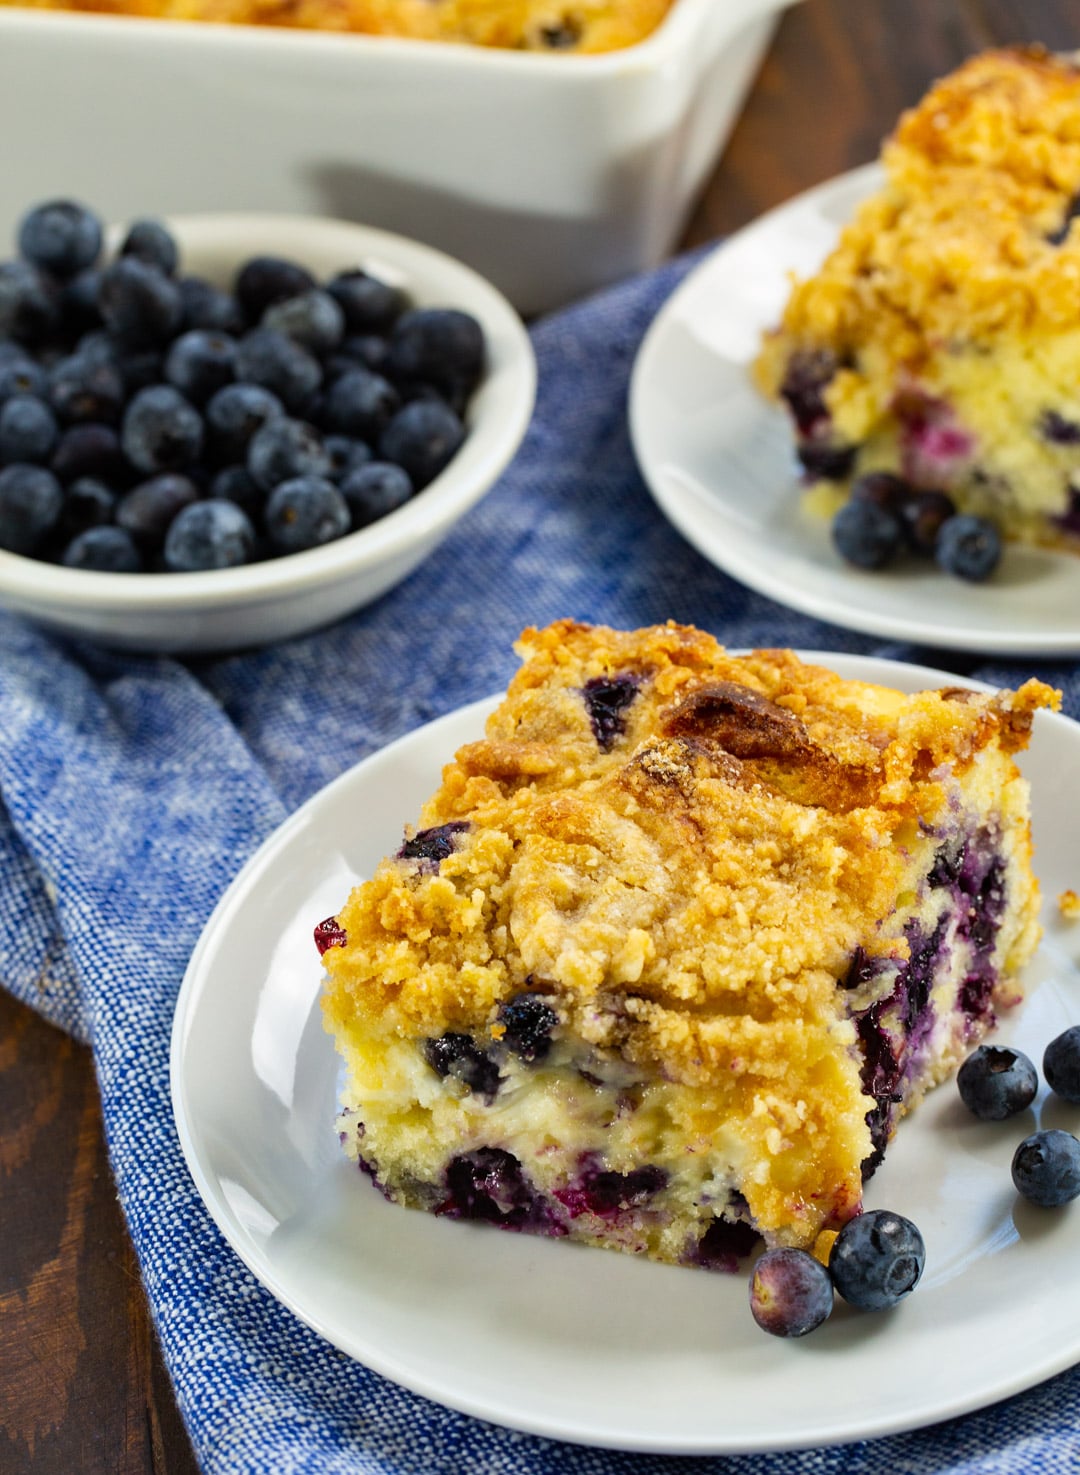 Two Slices of coffee cake on small plates and a bowl of blueberries.